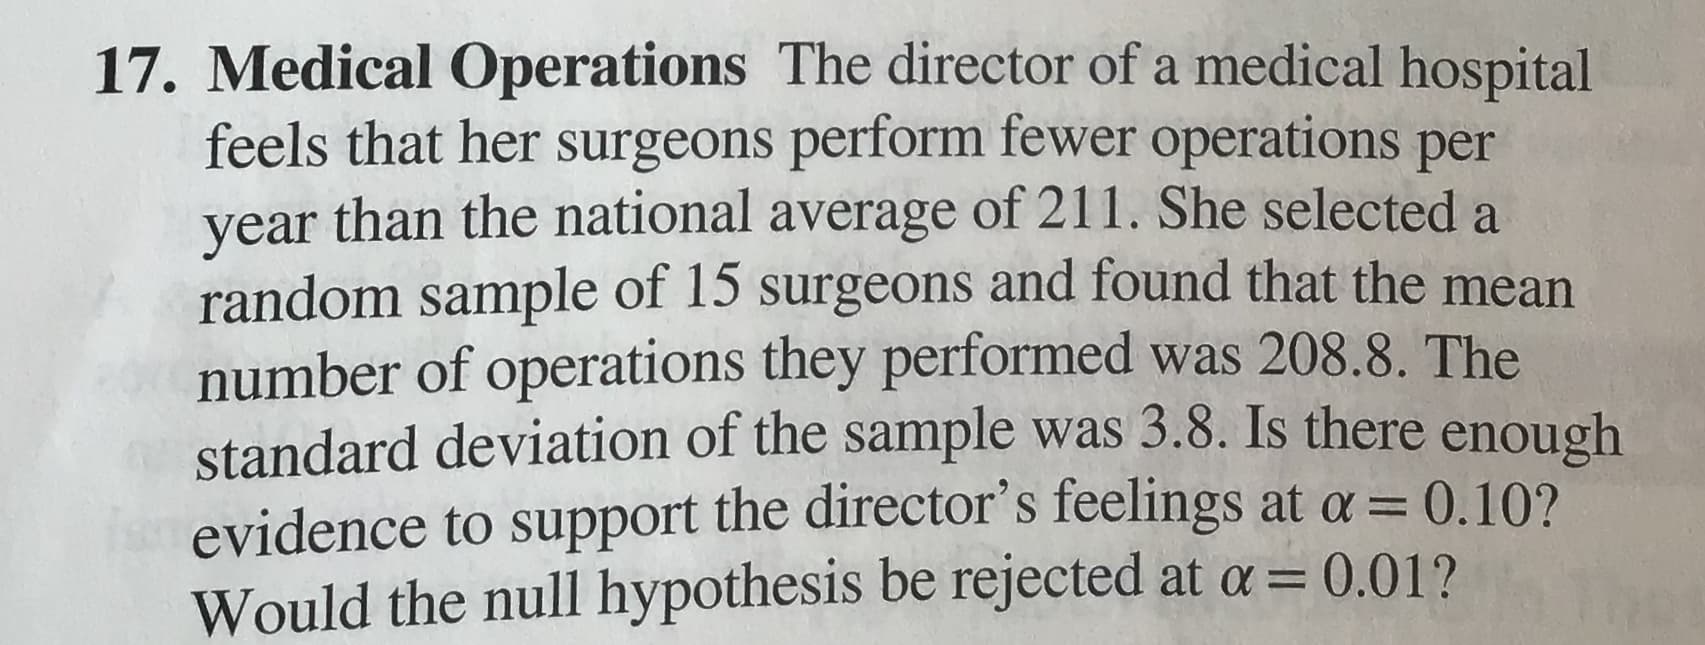 17. Medical Operations The director of a medical hospital
feels that her surgeons perform fewer operations per
year than the national average of 211. She selected a
random sample of 15 surgeons and found that the mean
number of operations they performed was 208.8. The
standard deviation of the sample was 3.8. Is there enough
evidence to support the director's feelings at a = 0.10?
Would the null hypothesis be rejected at a =
0.01?
